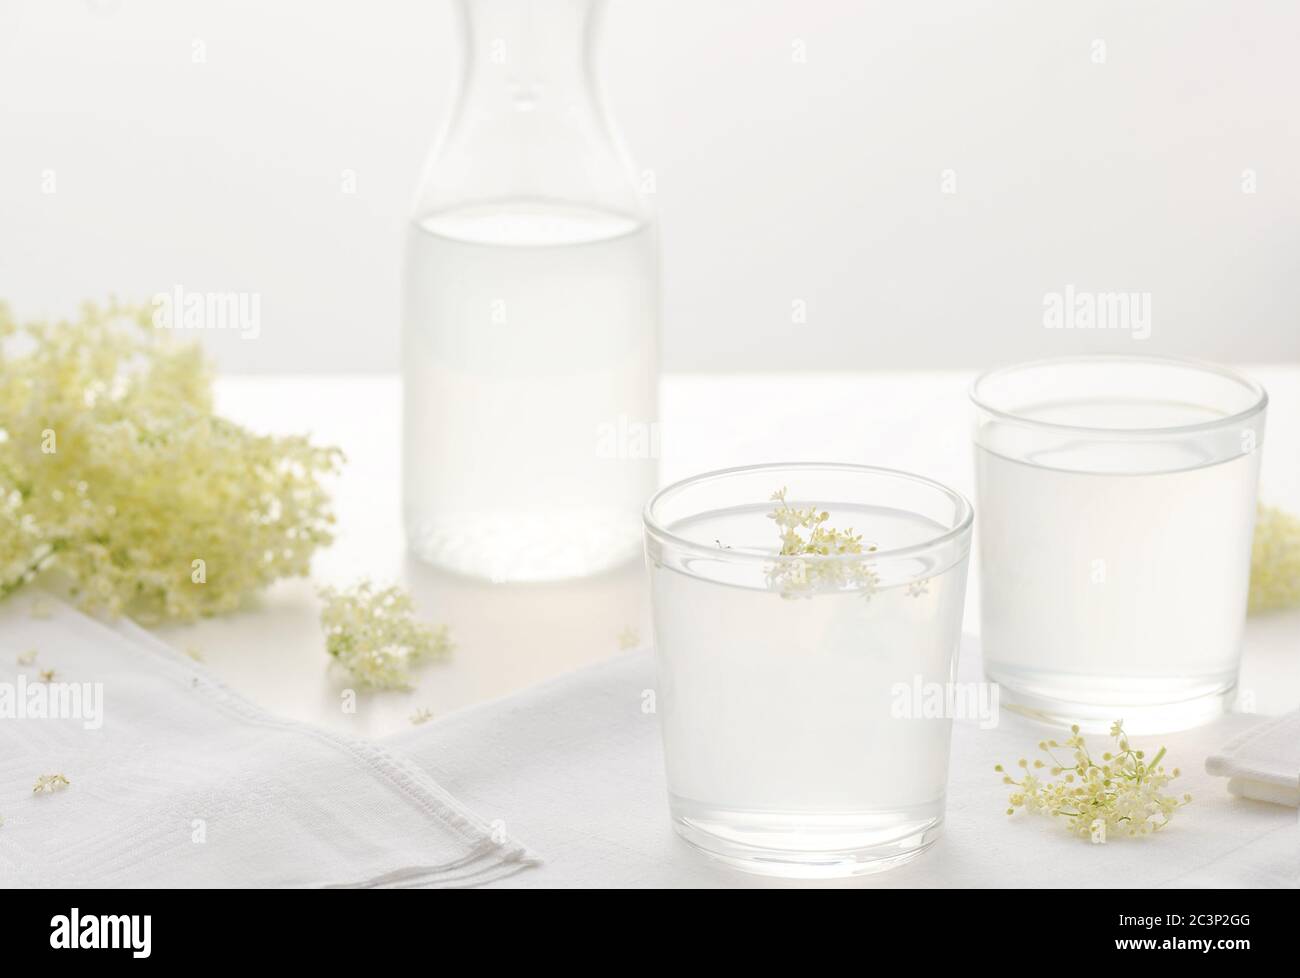 Elderberry flowers beverage on the drinking glass . Summer Healthy natural  flavored drink. Horizontal orientation. Stock Photo